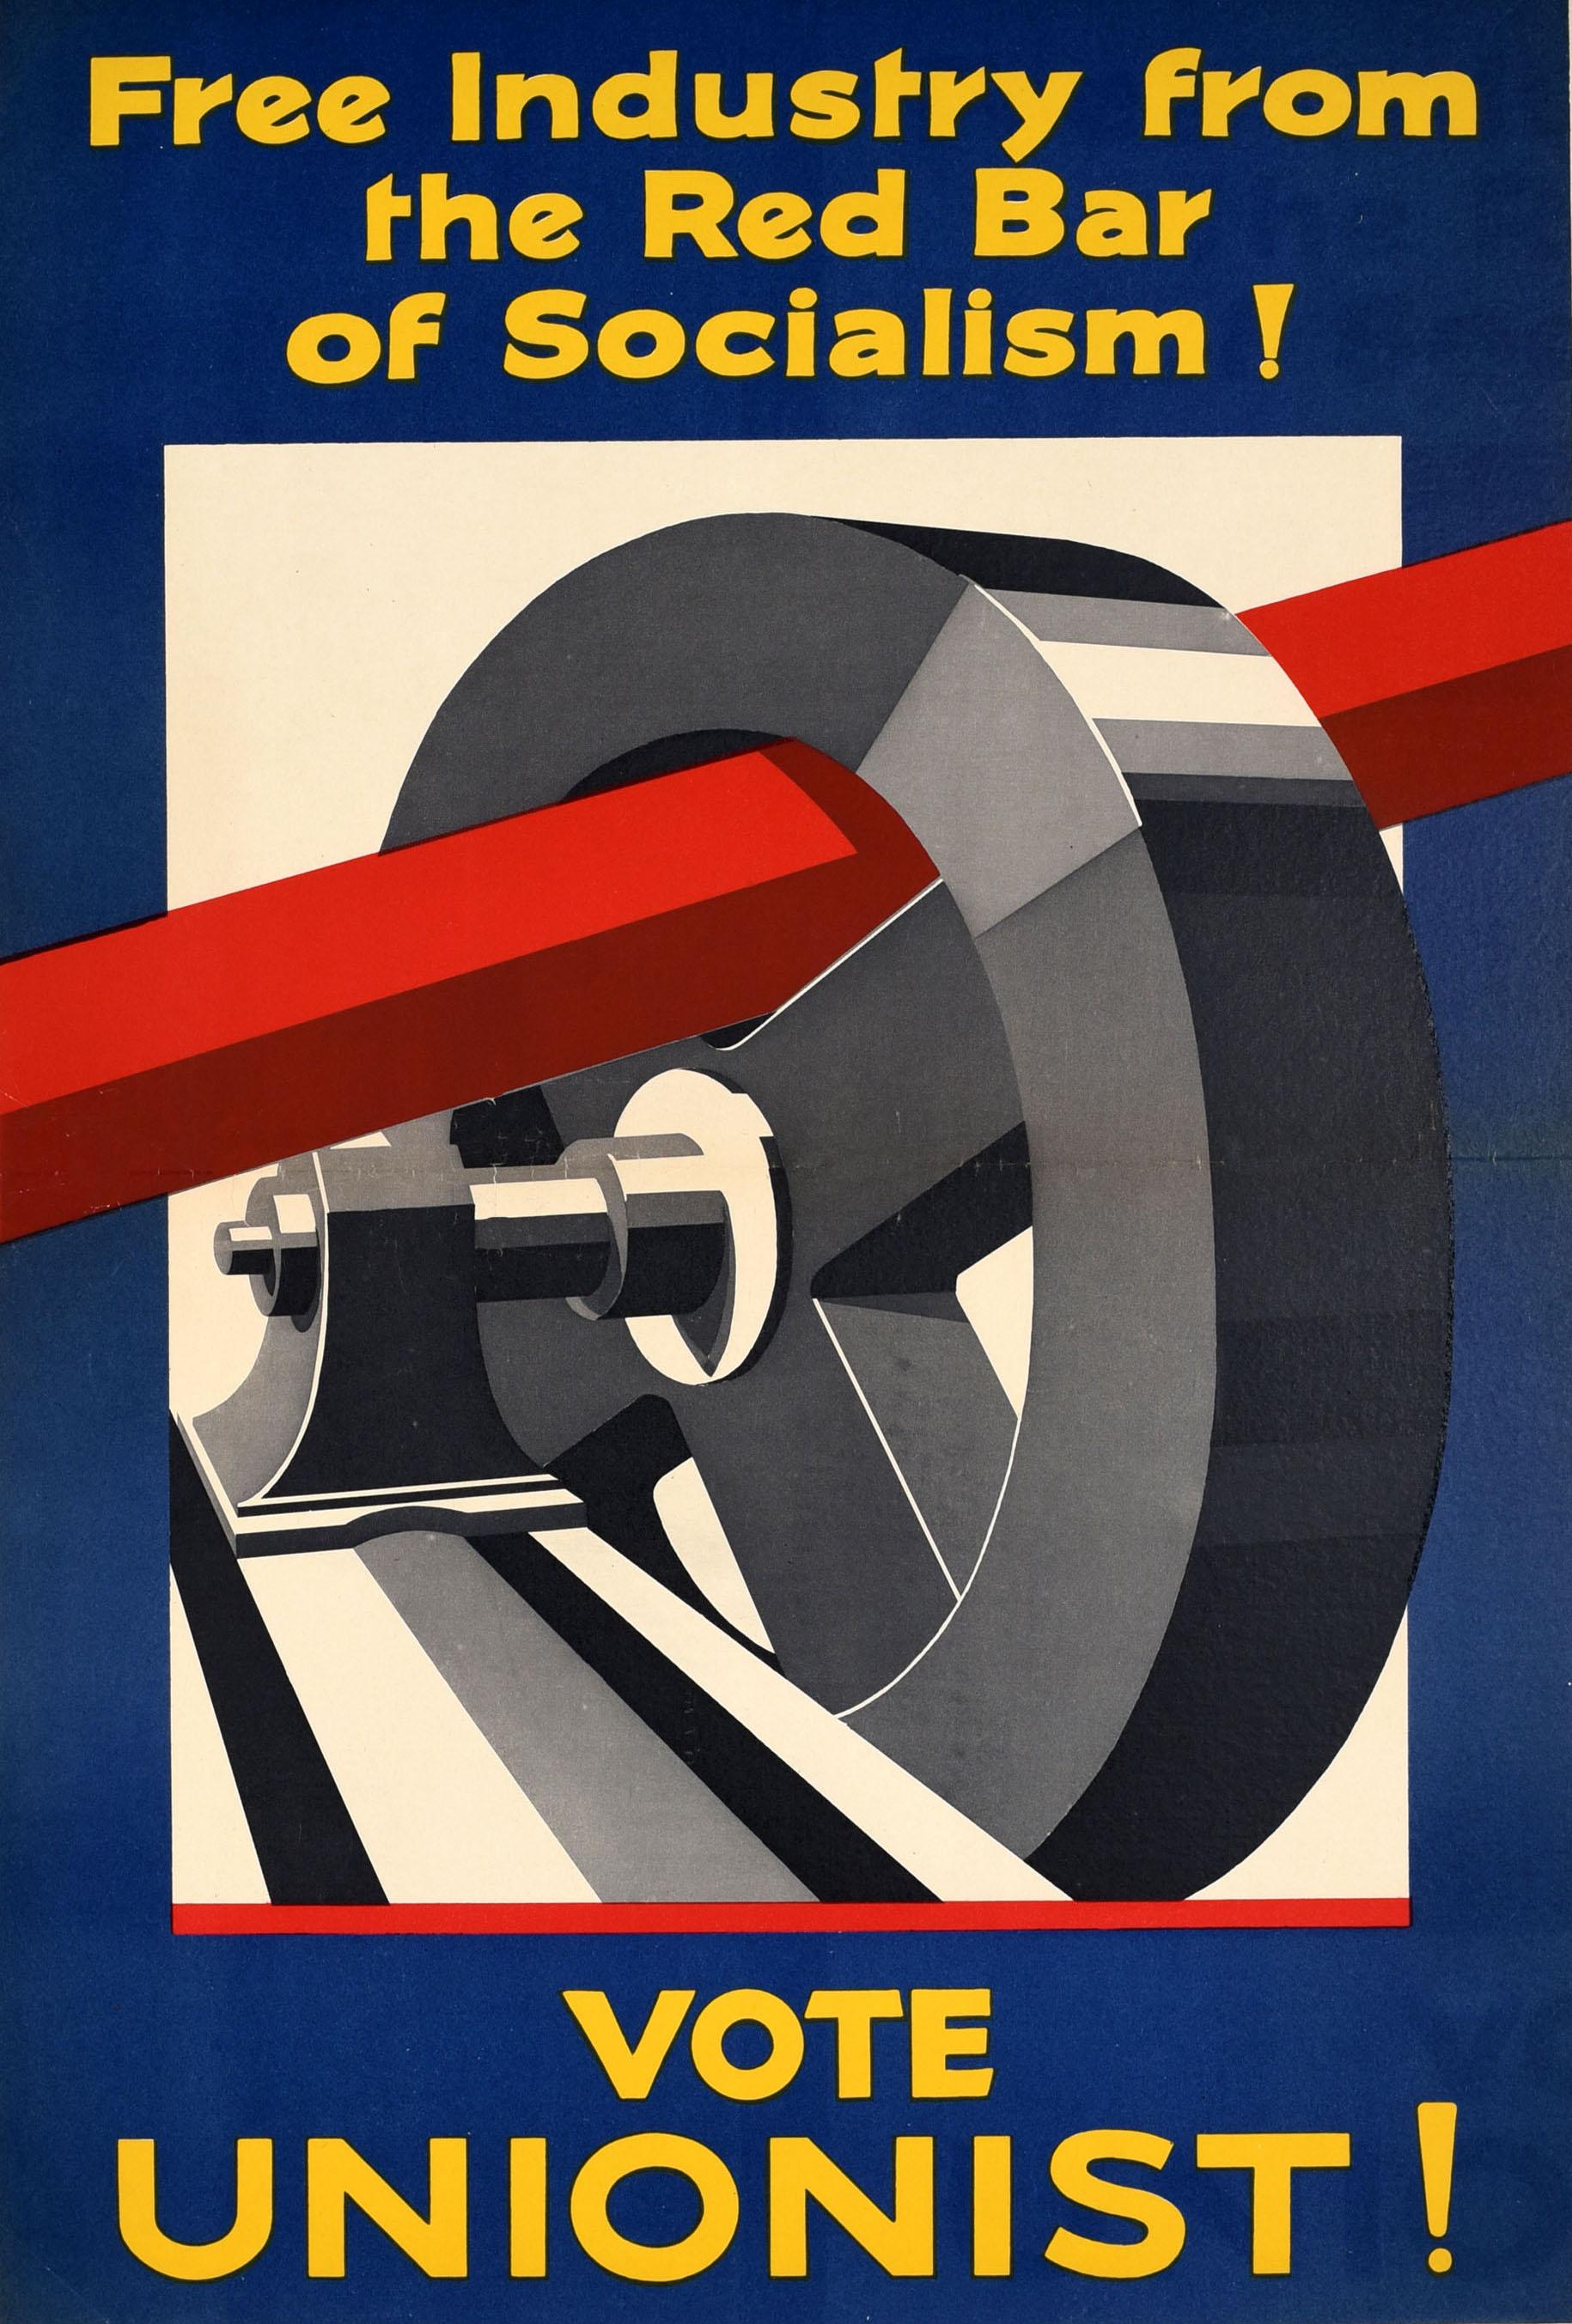 Original antique political election poster - Free Industry from the Red Bar of Socialism! Vote Unionist! - featuring a dynamic design depicting a red bar wedged into an industrial metal cog to prevent it from operating, the bold yellow text on the